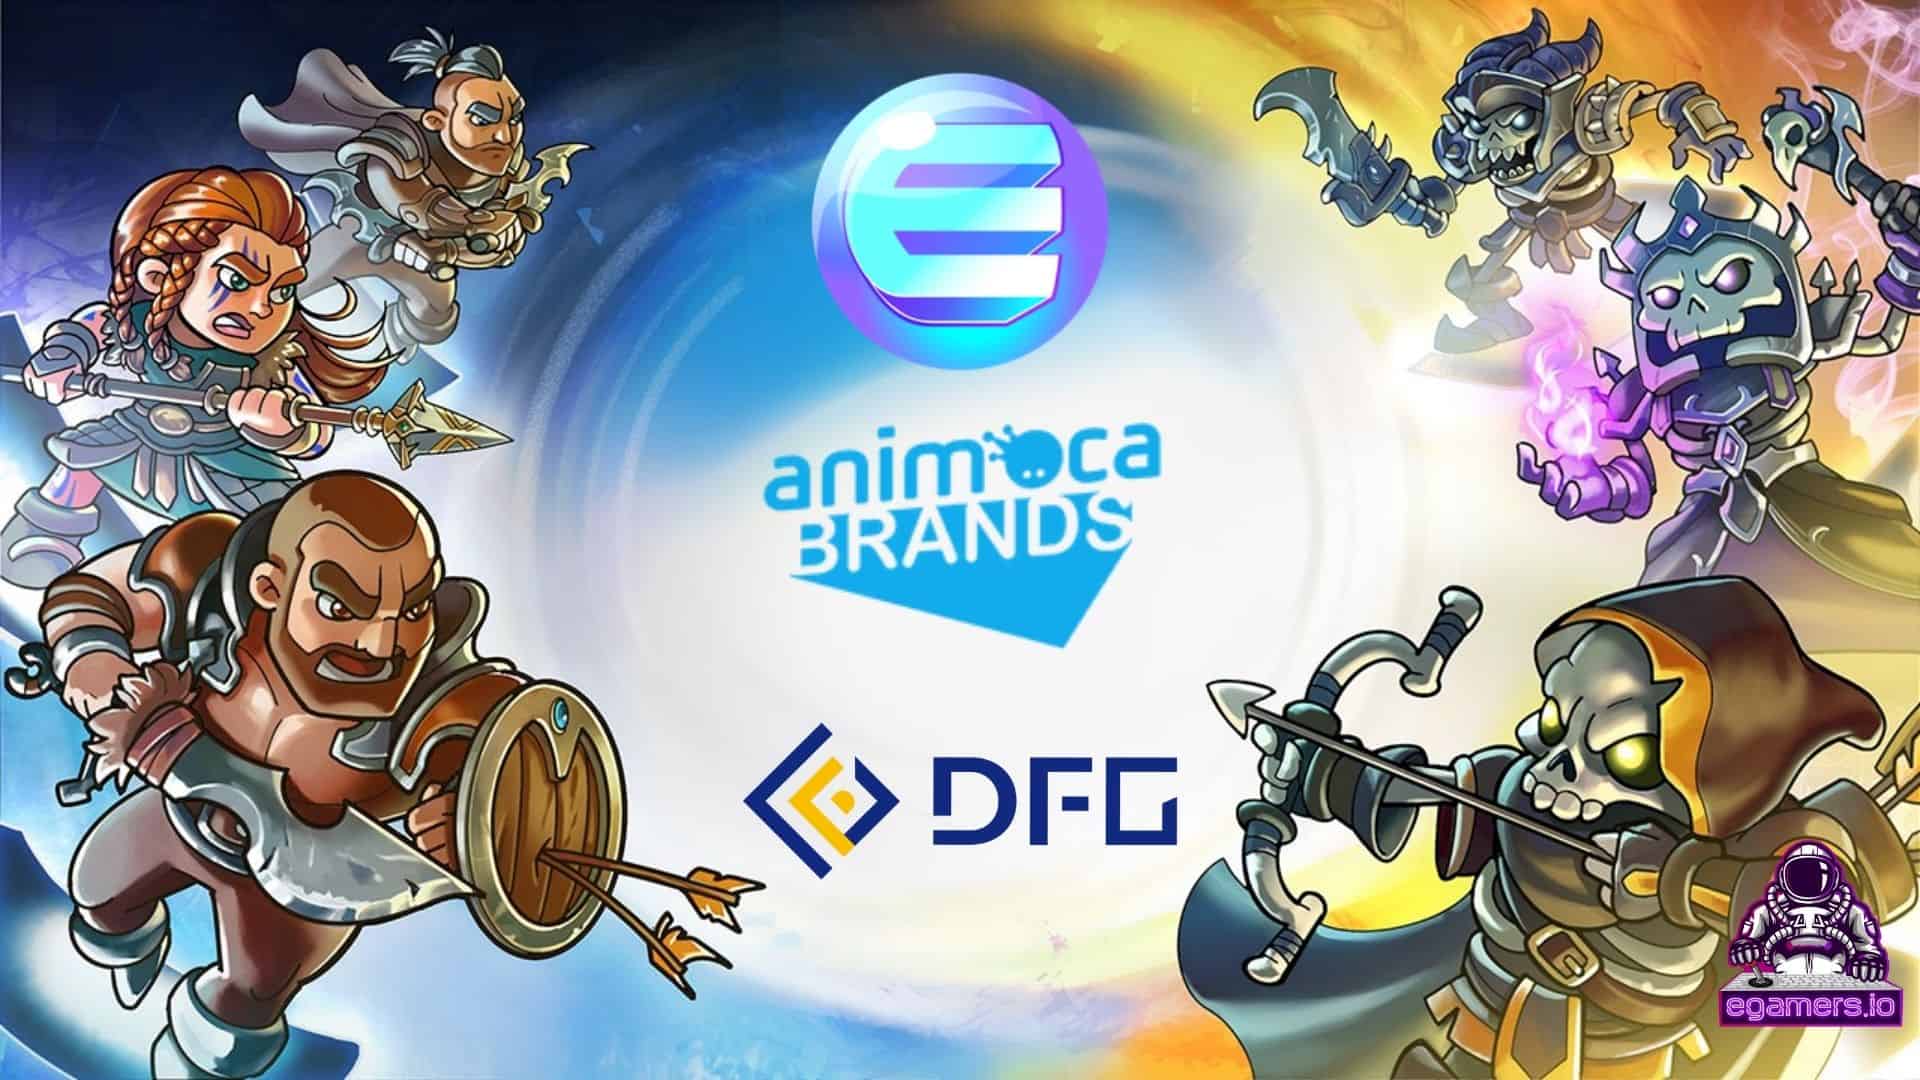 Kingdom Karnage raises 2M from Animoca Brands DFG and Enjin Dekaron M is a PC MMORPG that was first released in 2004 and published by Nexon. Now, the game is being rebranded as Dekaron G as they plan to bring blockchain features into the game. 